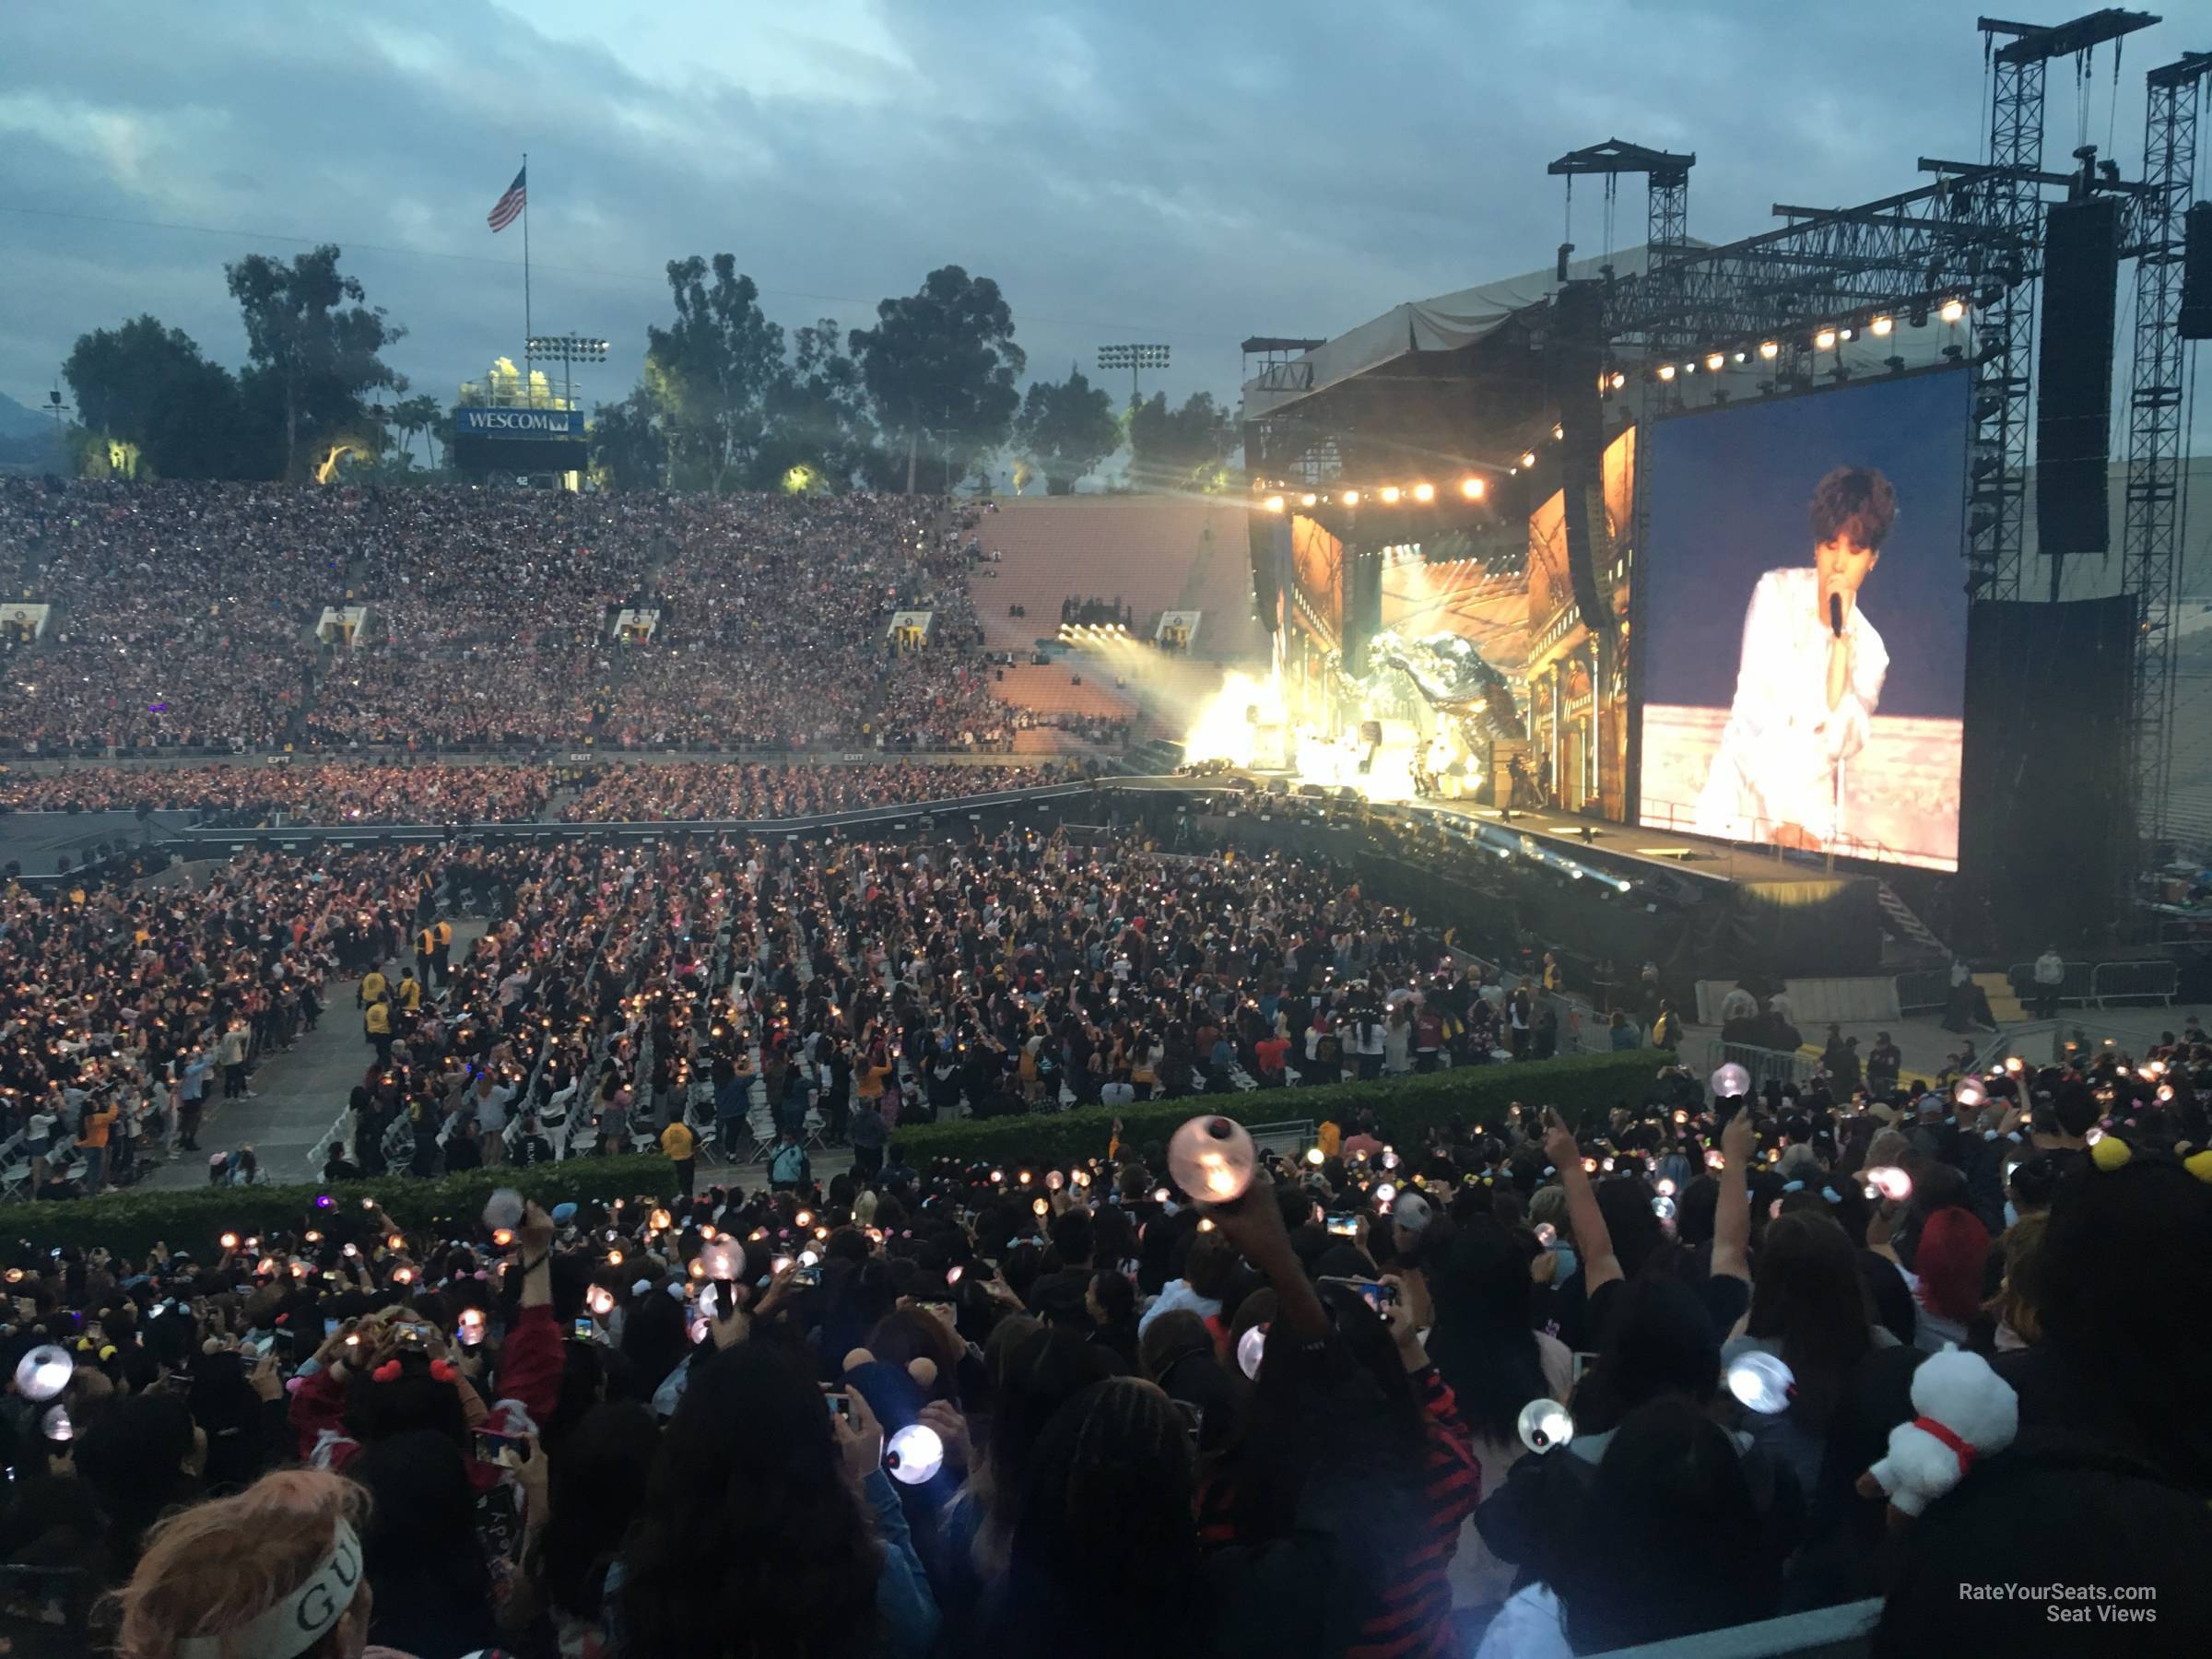 section 20, row 30 seat view  for concert - rose bowl stadium